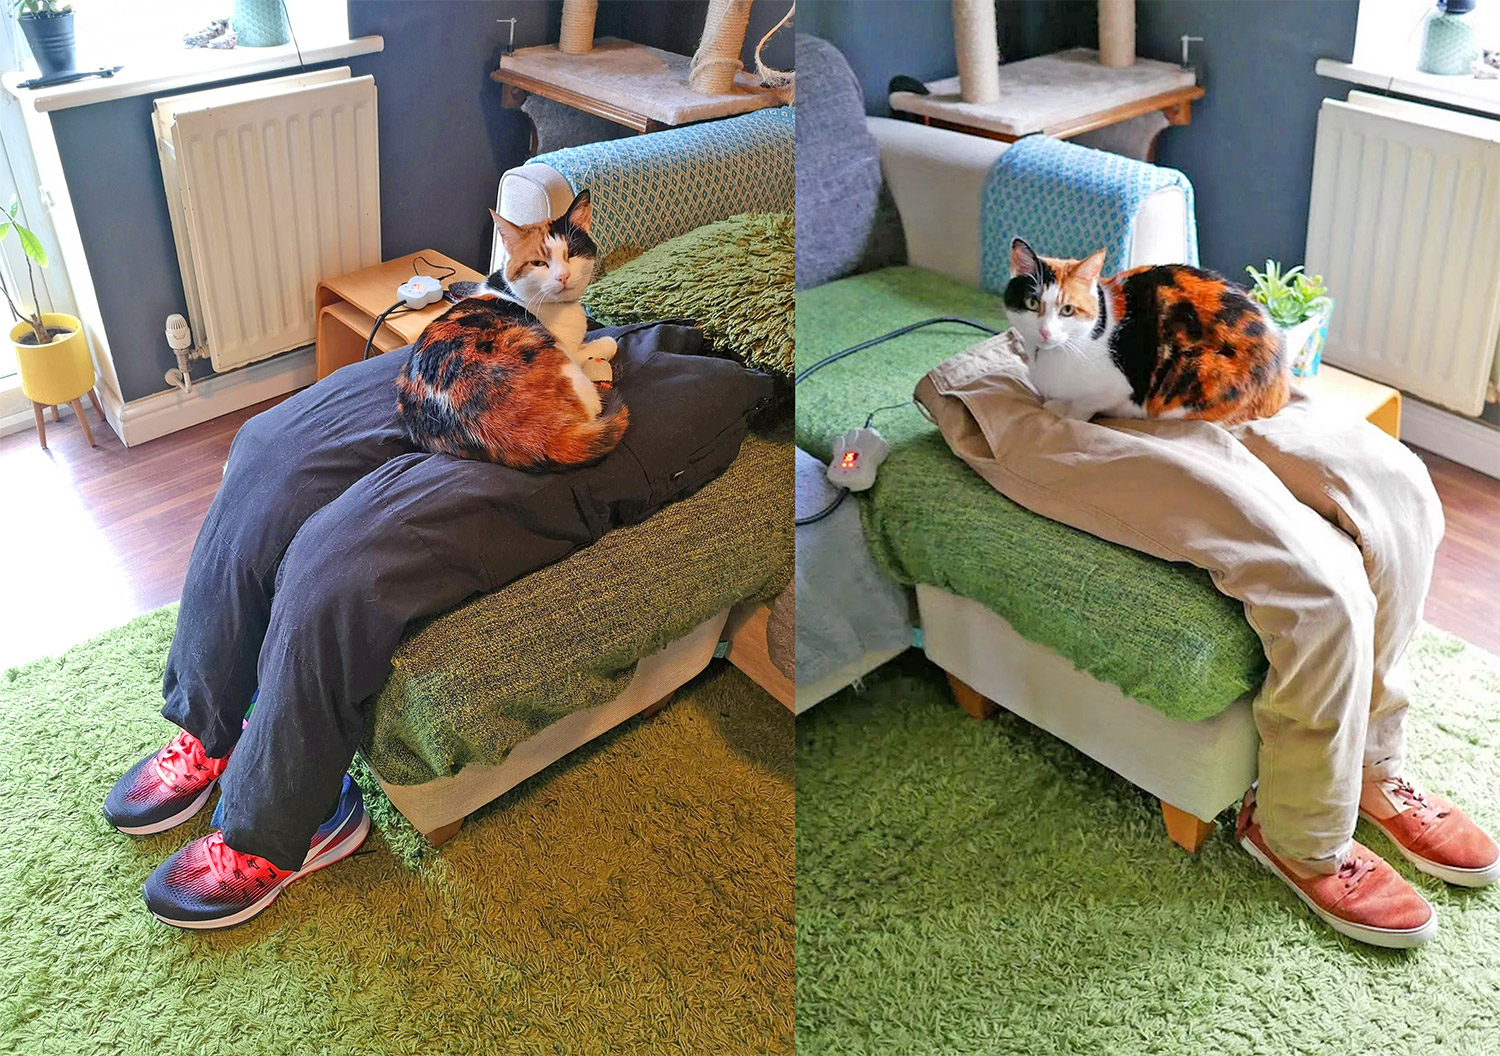 fake human decoy lap for cats - Fake stuffed pants with heated mat for cats